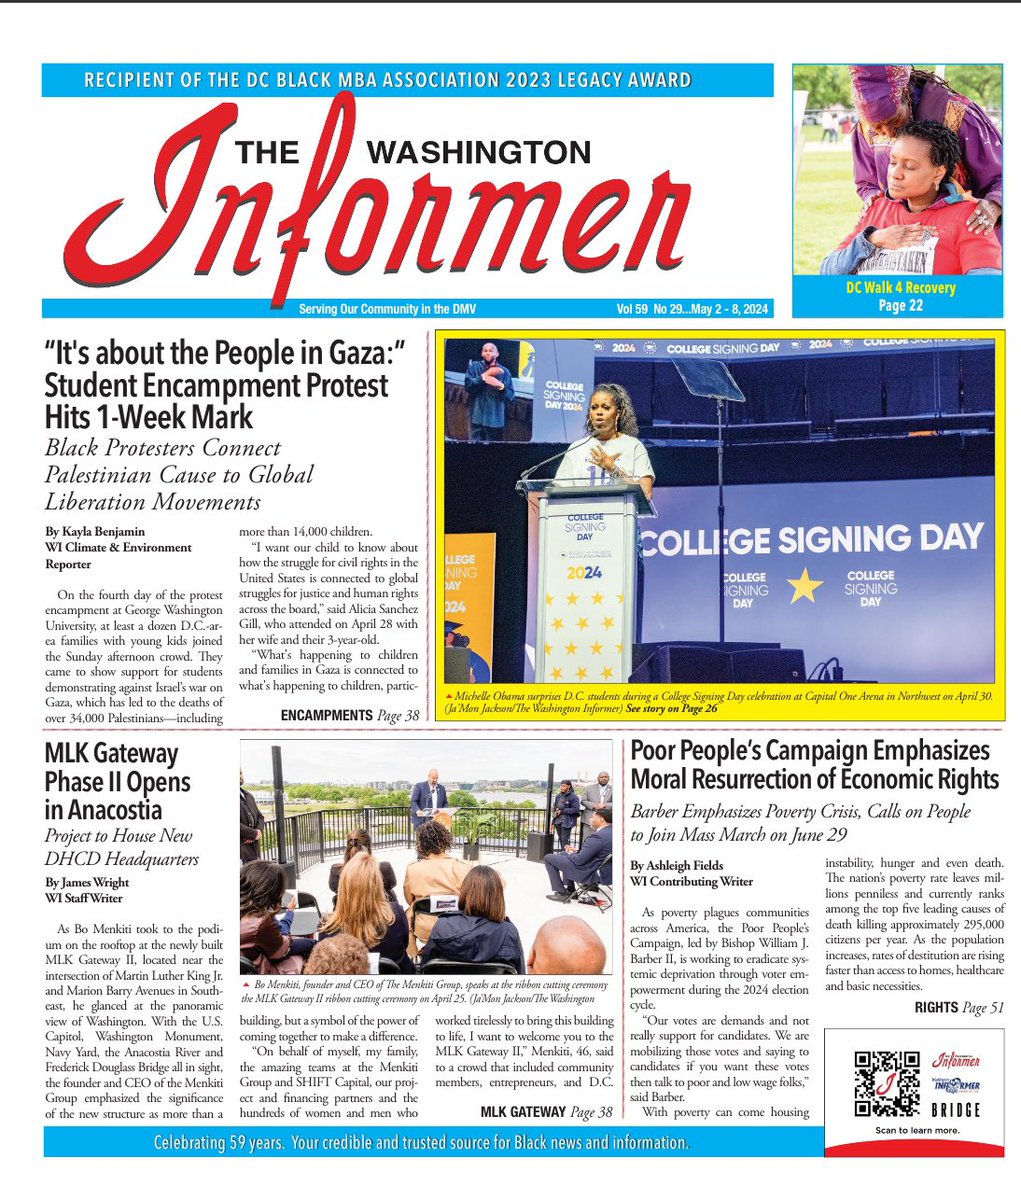 Happy Sunday 📰 Catch up on your local news and Pick up your copy of this week’s Washington Informer, available on newsstands across the DMV or the web at WashingtonInformer.com #BeInformed #PGCounty #CrimeCrisis #environment #DC #dcbudget #CeasefireNOW